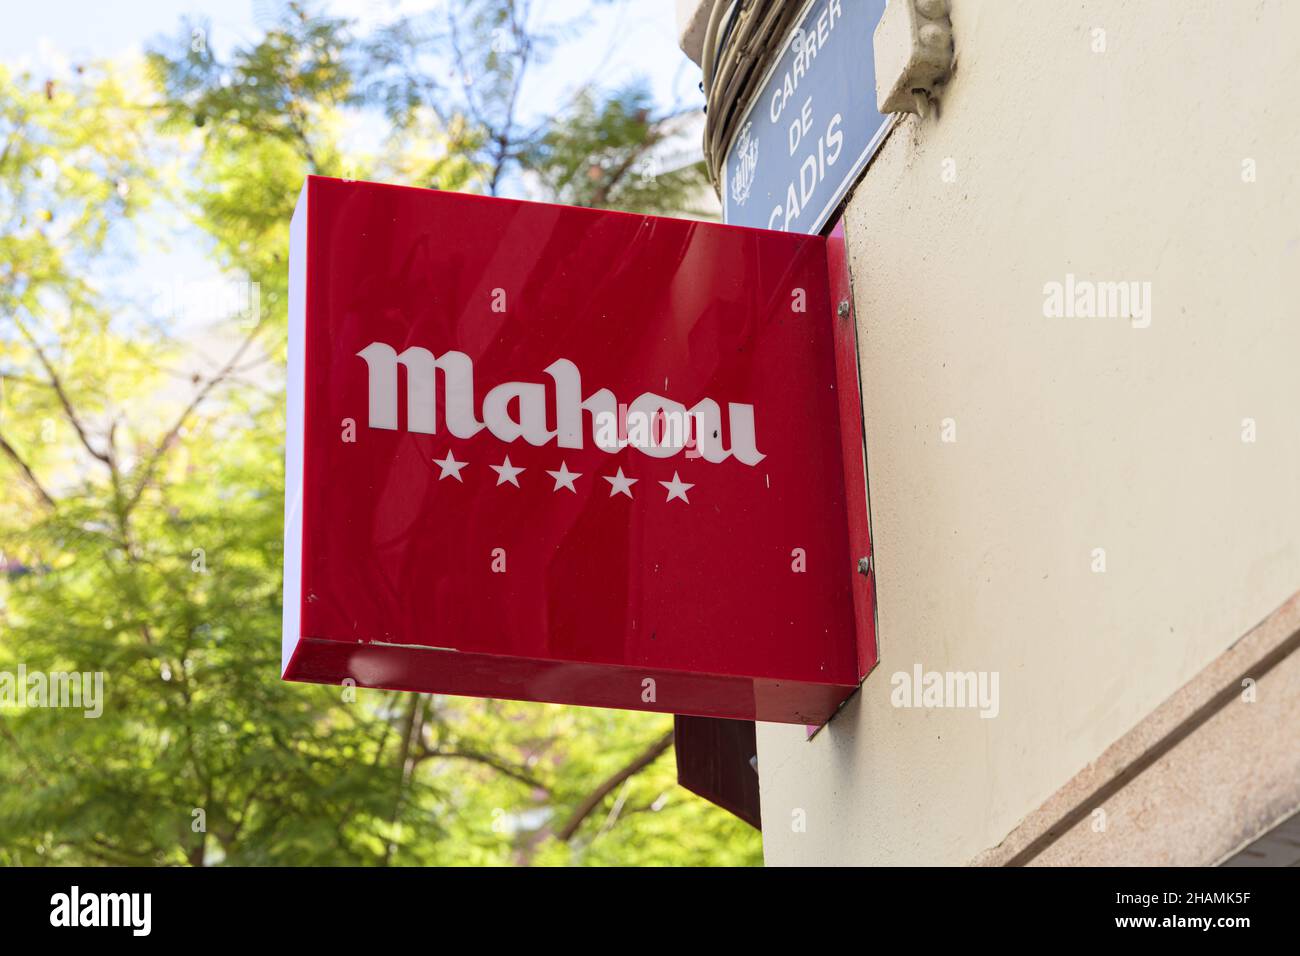 VALENCIA, SPAIN - DECEMBER 09, 2021: Mahou is a Spanish brewery founded in Madrid in 1890 Stock Photo